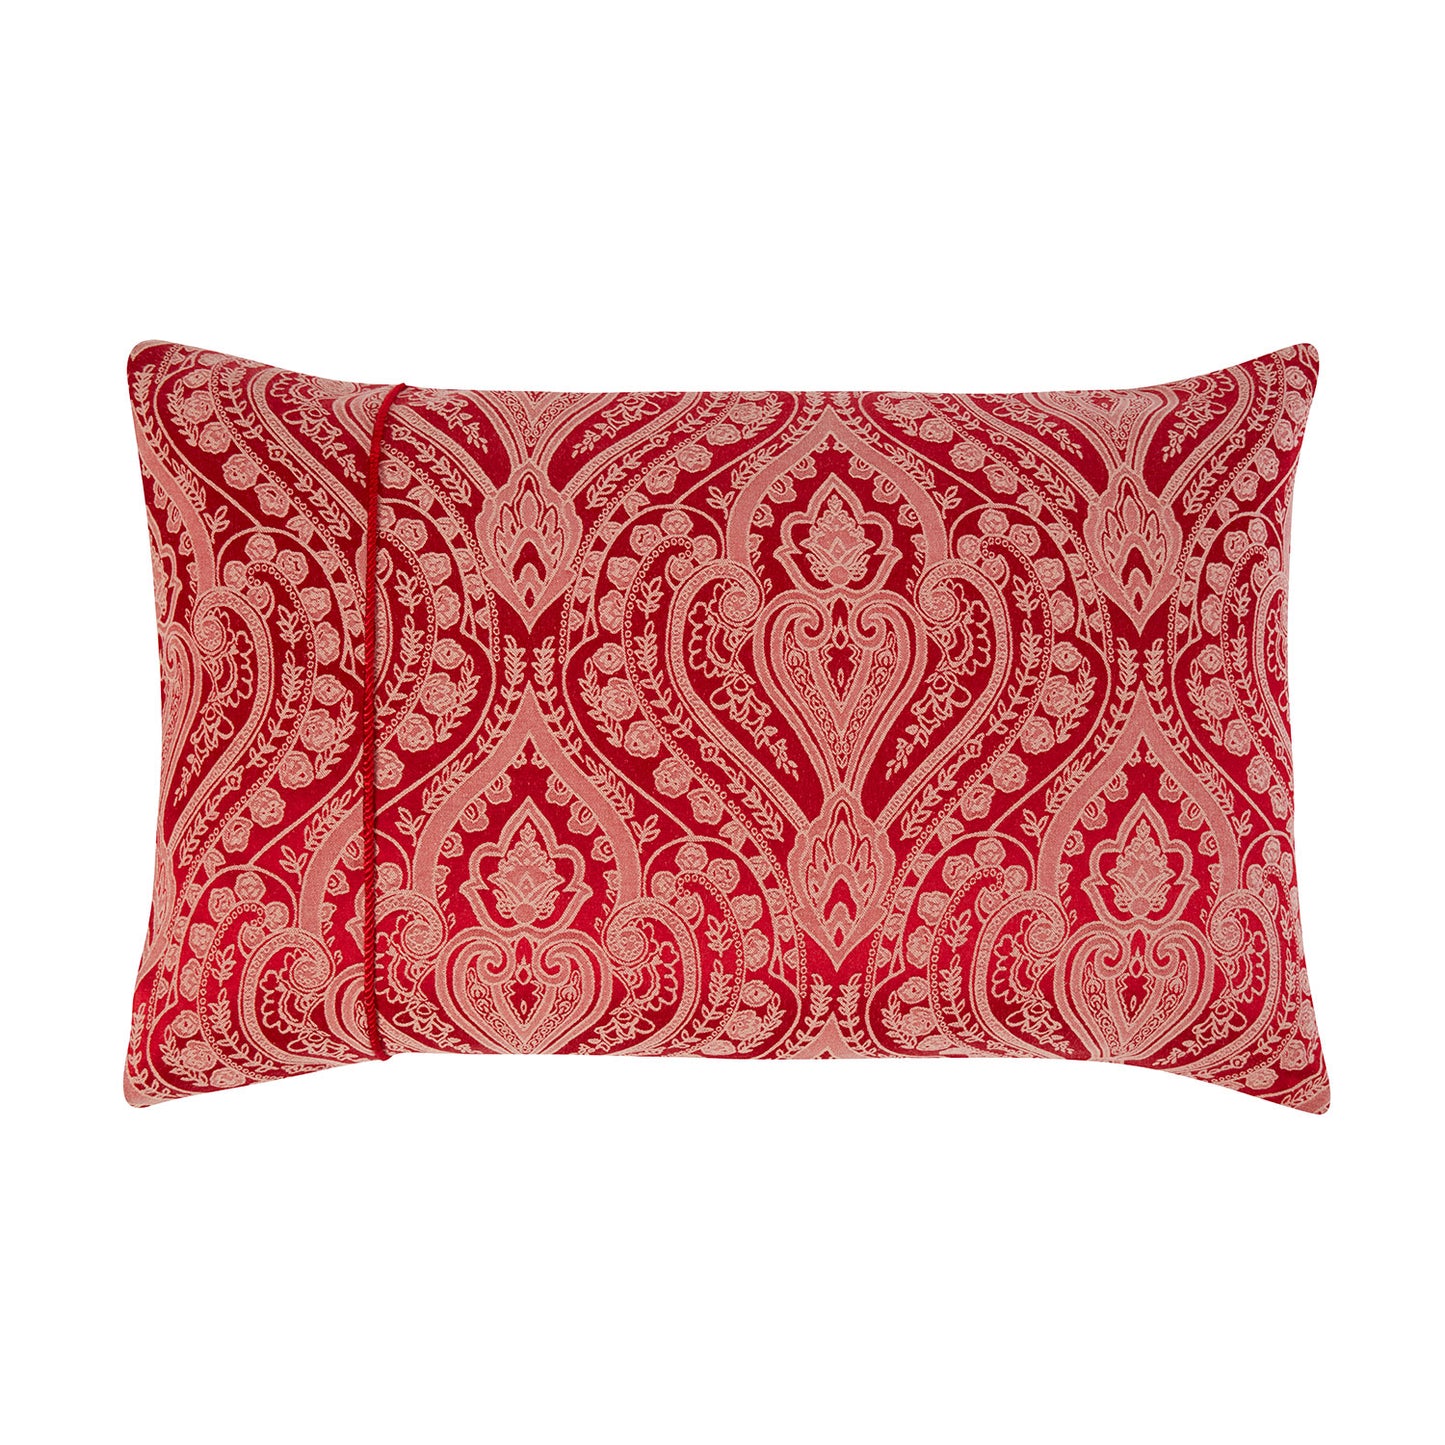 Regency Red Luxury Cotton Rich Jacquard Housewife Pillowcases (Pair)